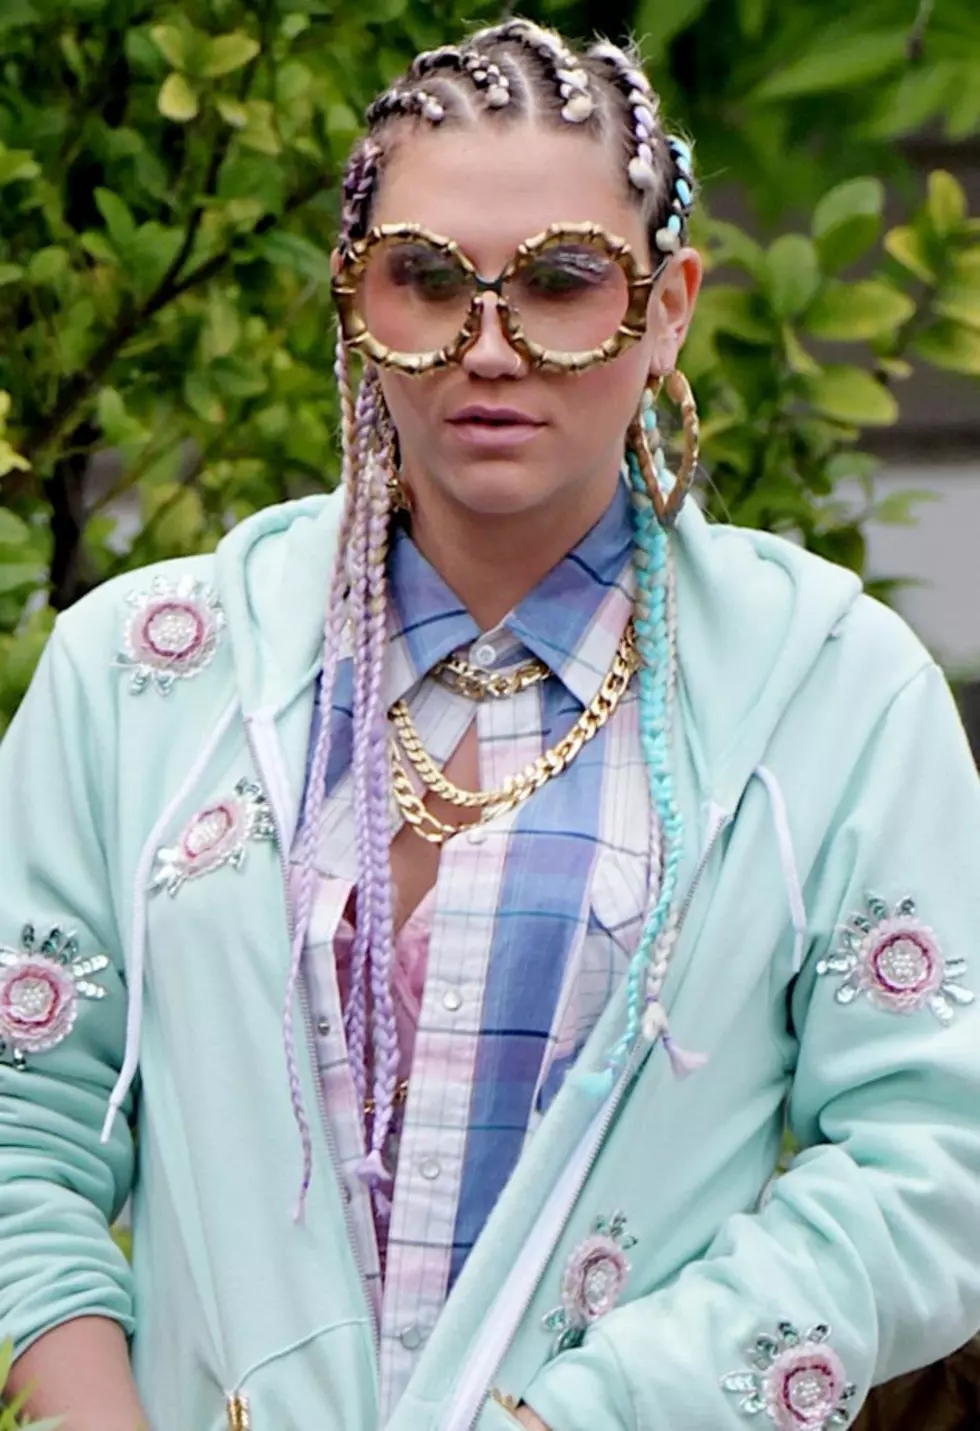 Kesha Nerds Out in Glasses + Cornrows on Set of &#8216;Crazy Kids&#8217; Video [Pics]